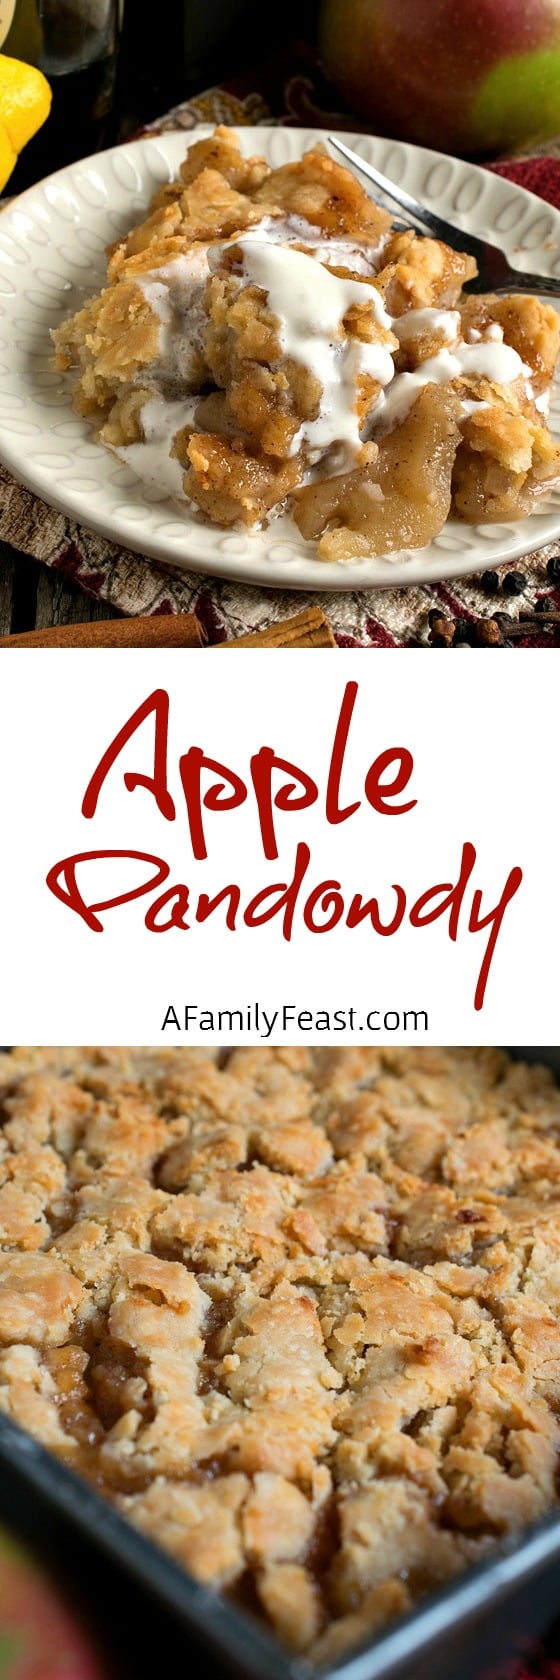 Apple Pandowdy - A vintage New England recipe, this apple dessert has a rich, sweet and very distinctive flavor!